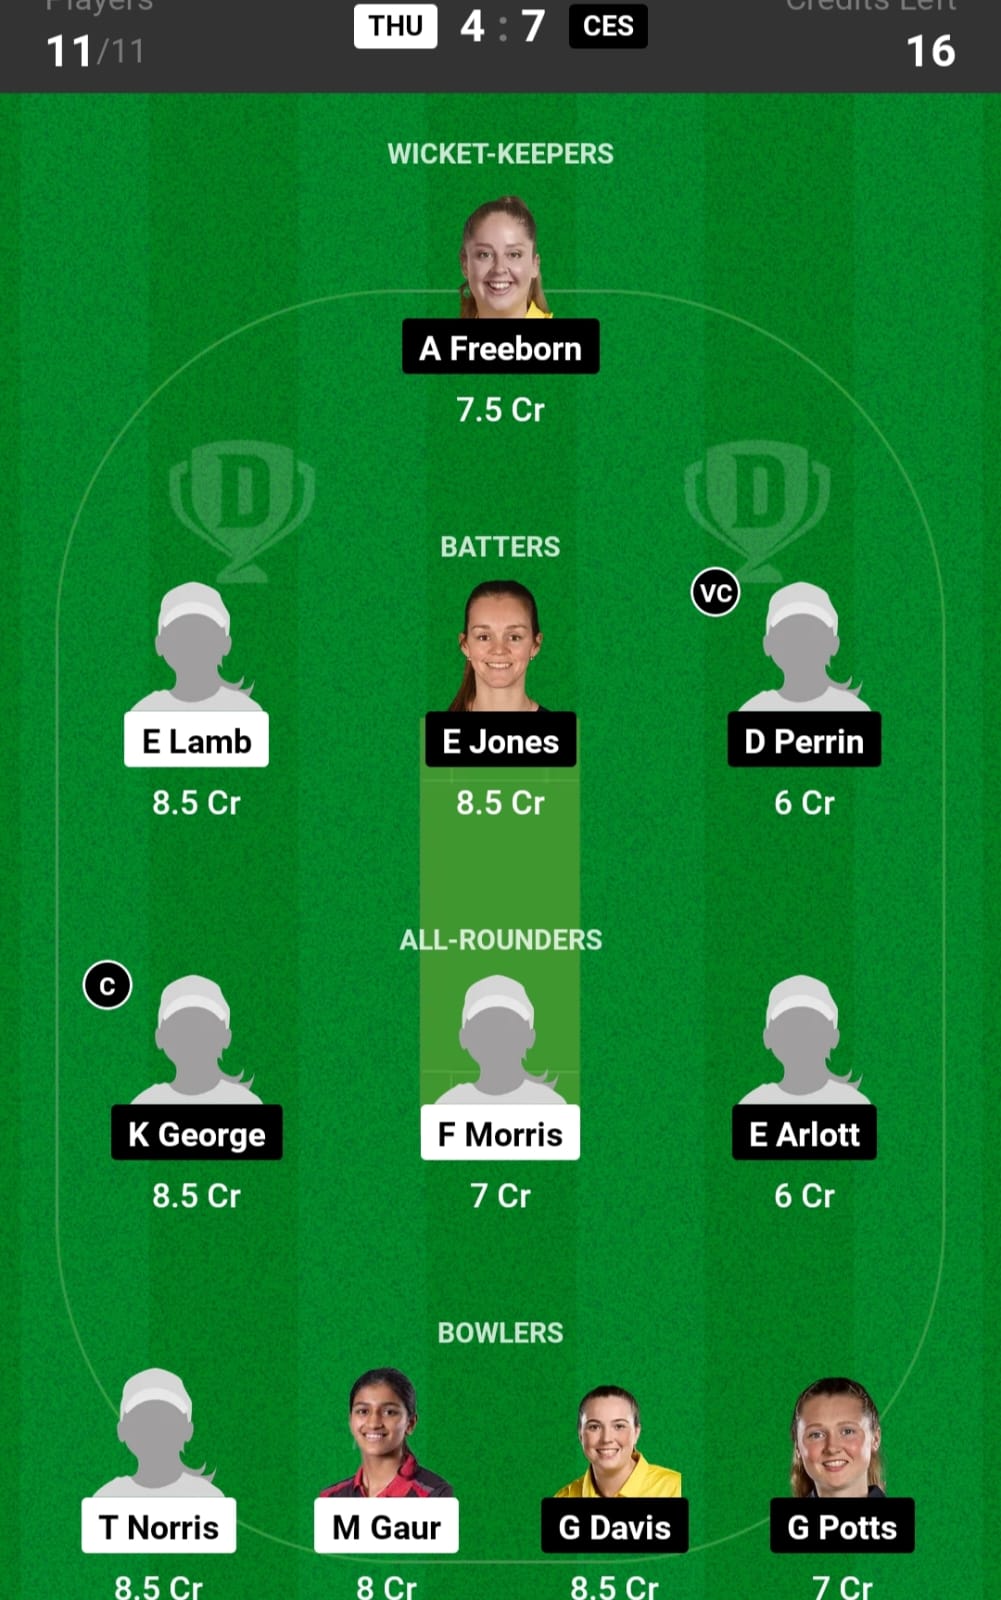 THU vs CES Dream11 Team Prediction - Katie George & Davina Perrin will be the excellent option for C & VC